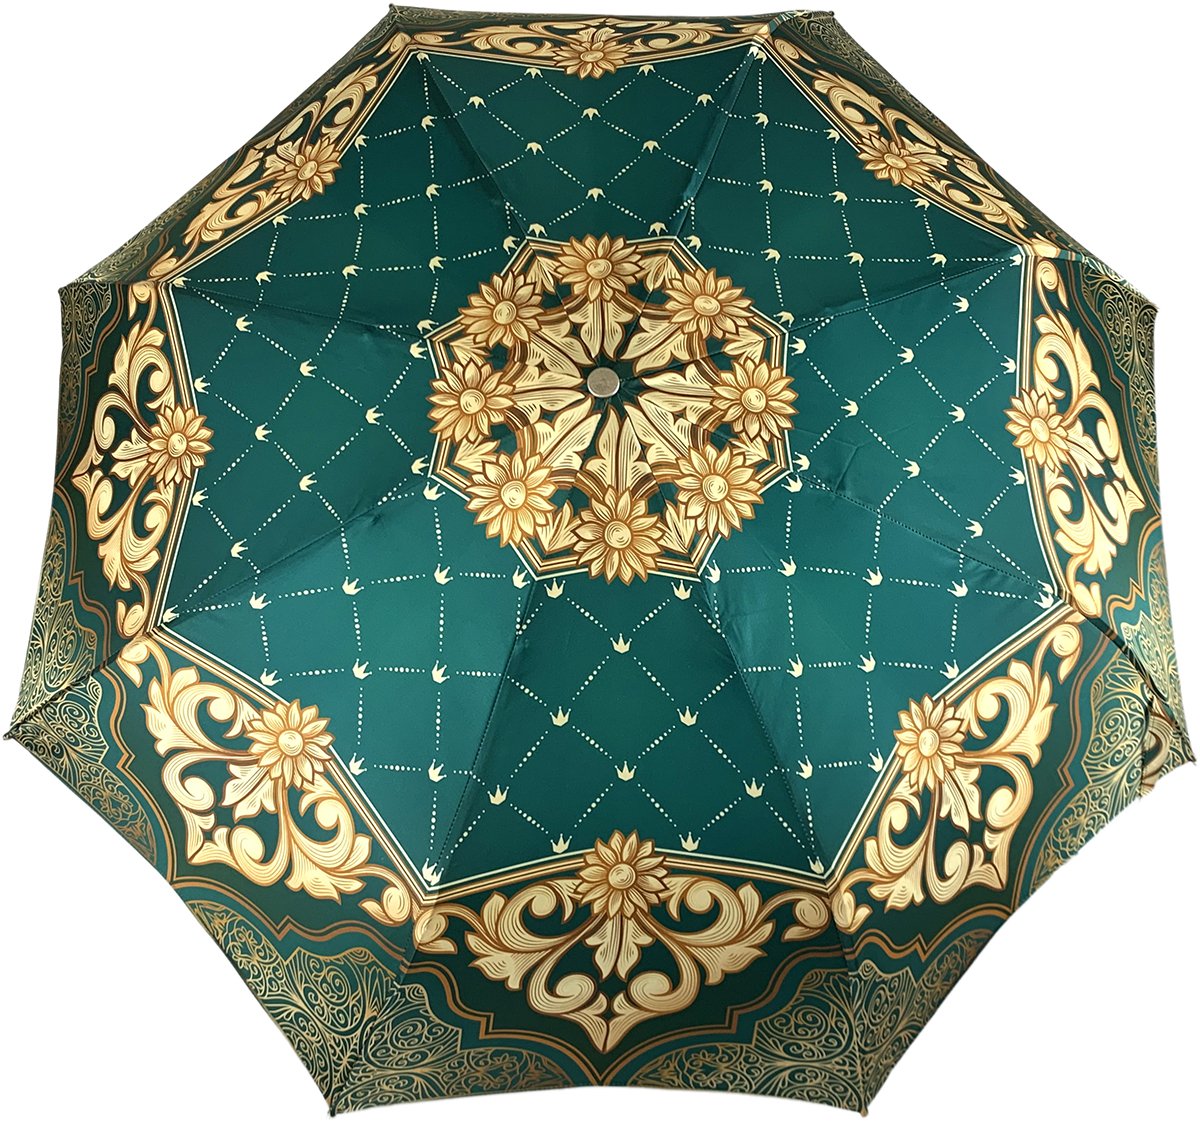 Green and Beige  Women's Folding Umbrella - IL MARCHESATO LUXURY UMBRELLAS, CANES AND SHOEHORNS